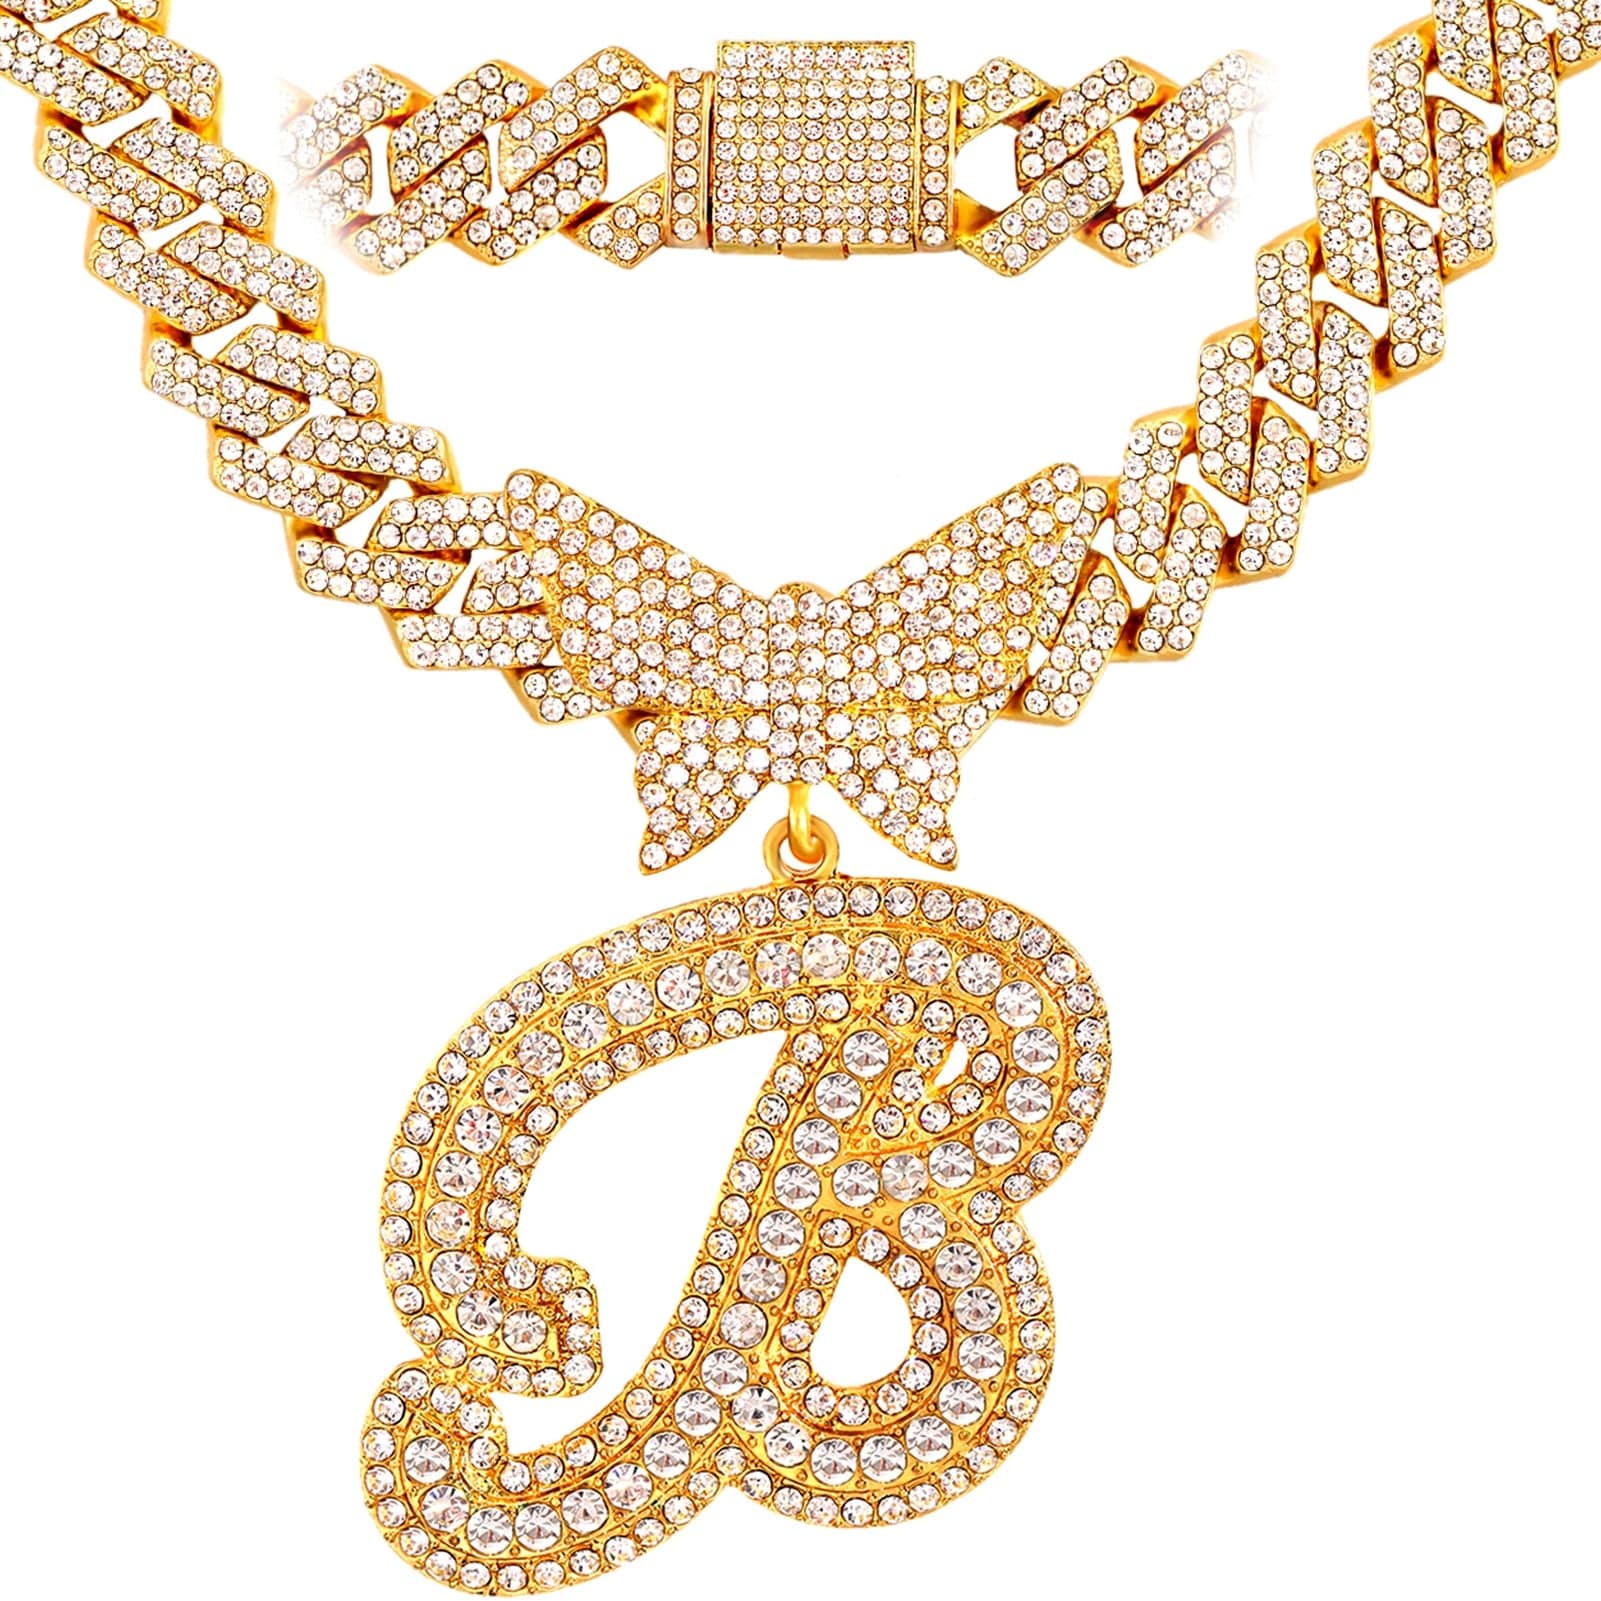 VVS Jewelry hip hop jewelry B / Gold Bling Butterfly Letter Cuban Link Chain